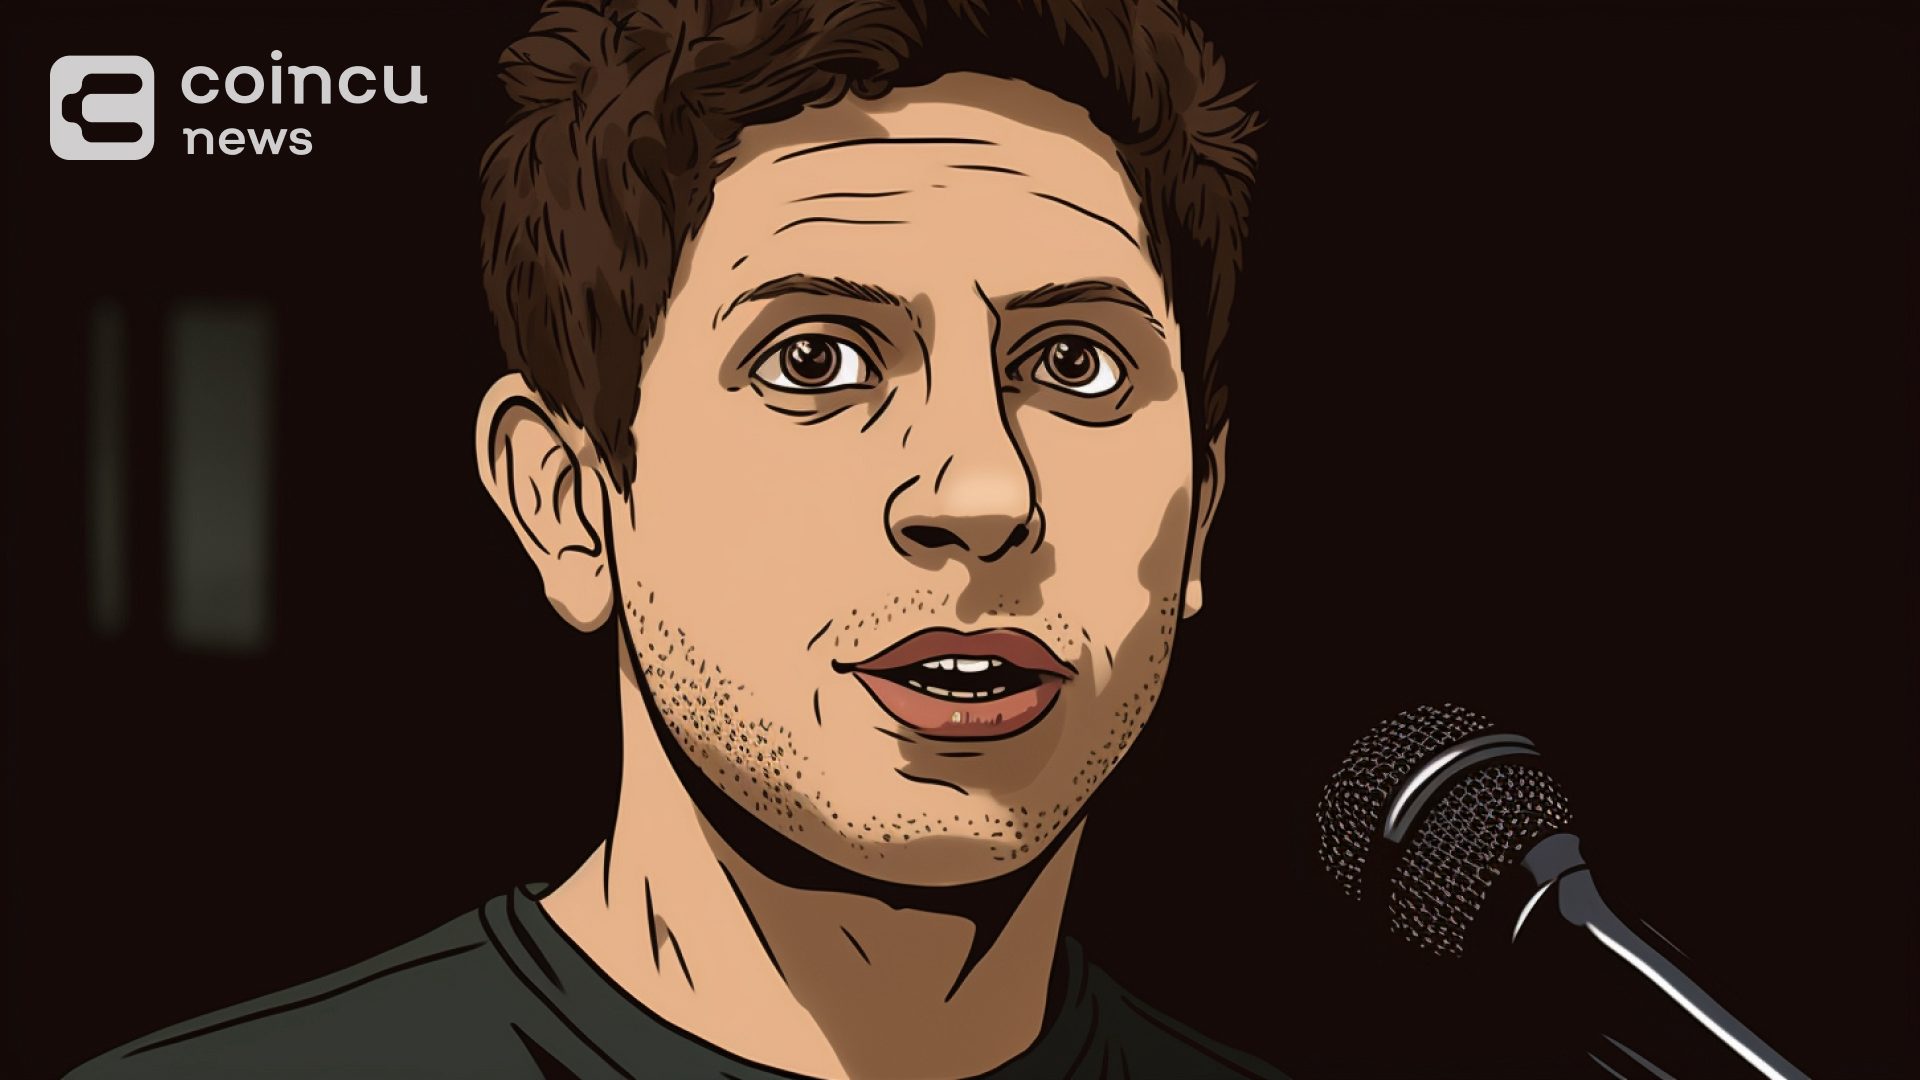 Sam Altman’s Worldcoin Is Now Promoting Partnership With PayPal